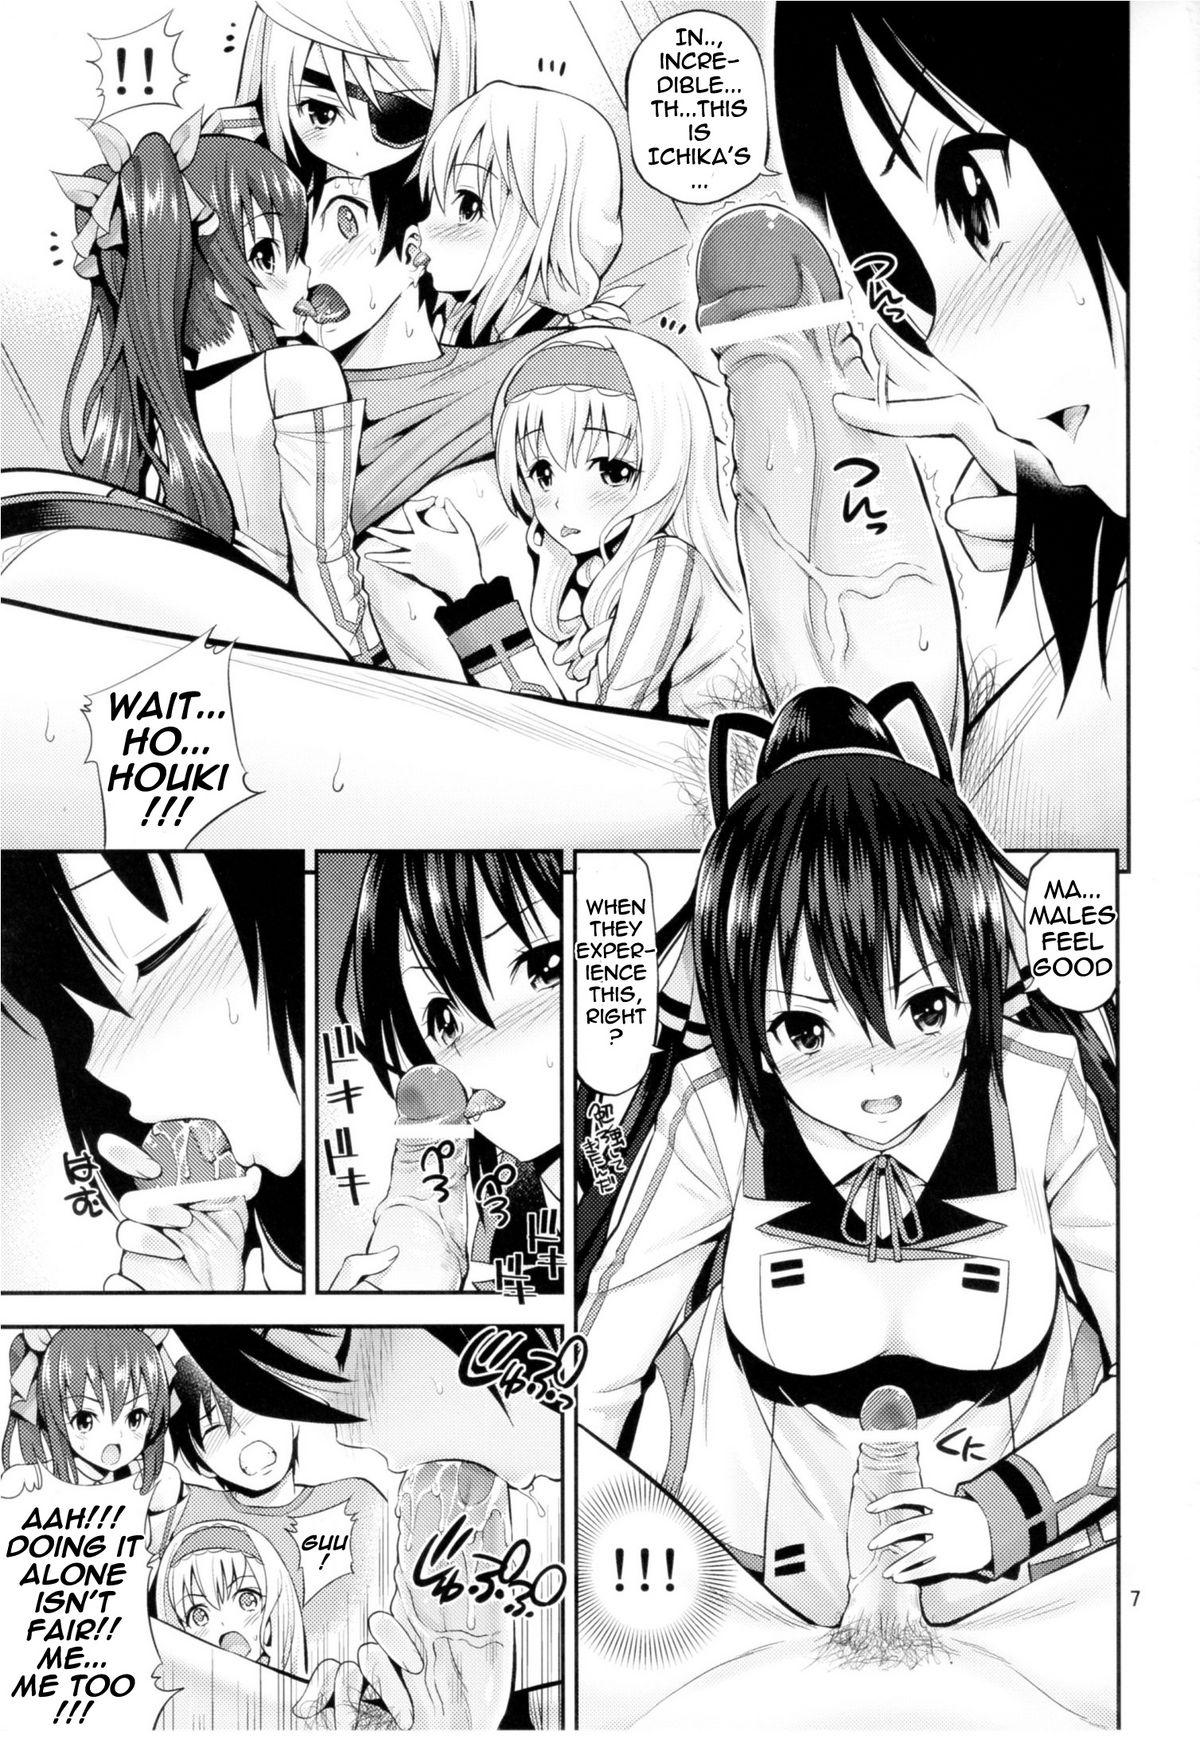 Hot Girl Pussy This is Harlem - Infinite stratos Smoking - Page 6